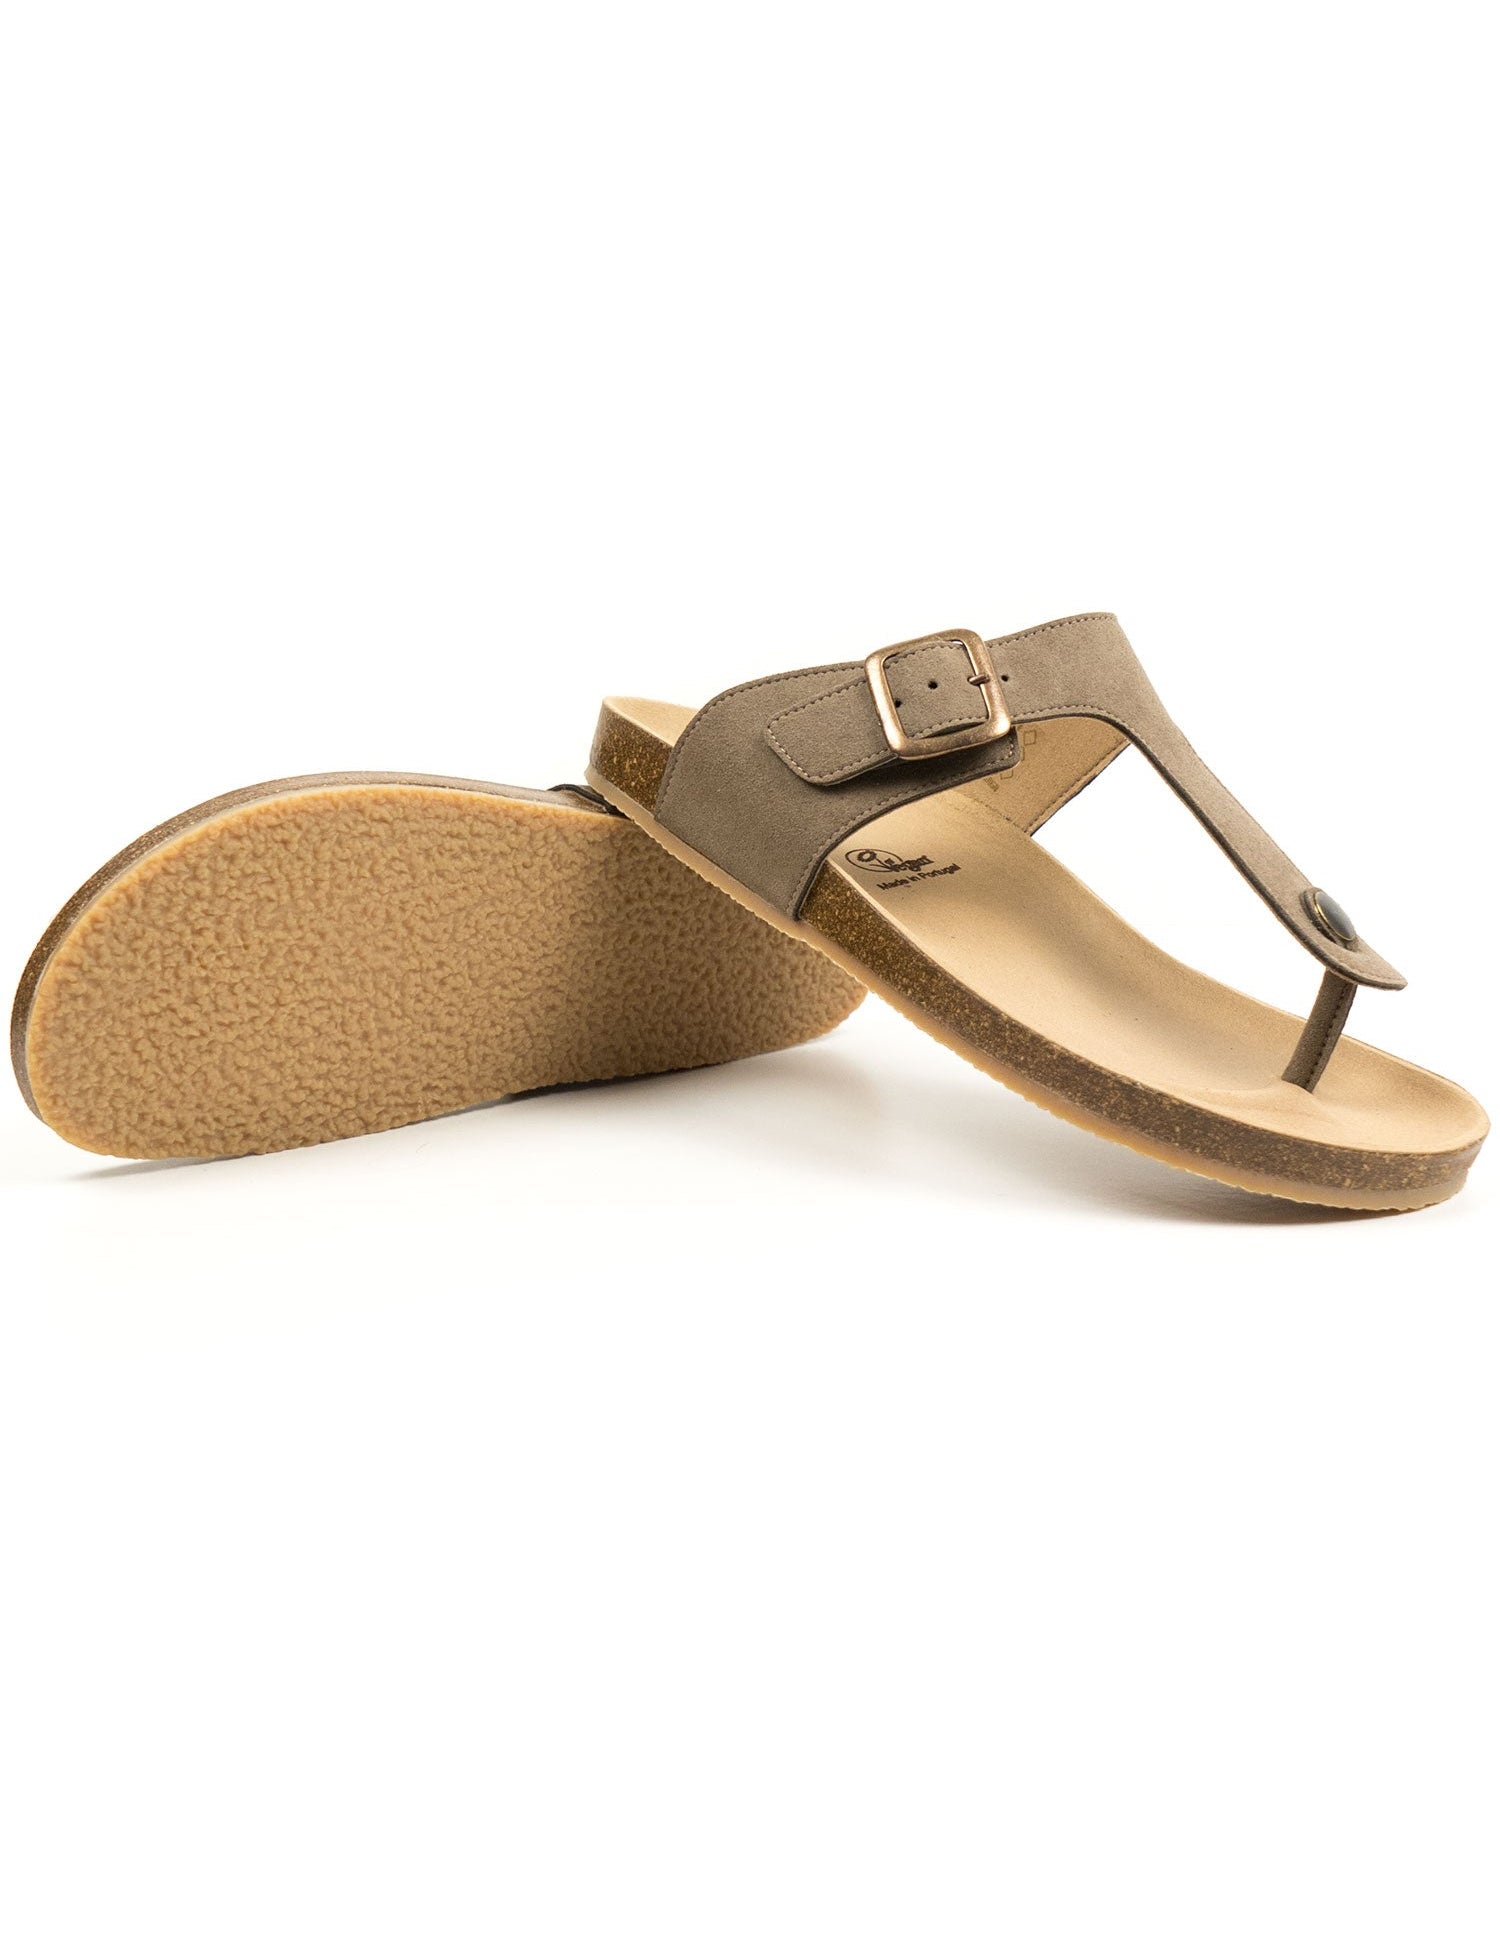 Phototemplate-Recovered.psd_0108_mens-toe-peg-sandals-1_4abf4902-0cdc-4aa1-9a8b-a14603dfb24a.jpg